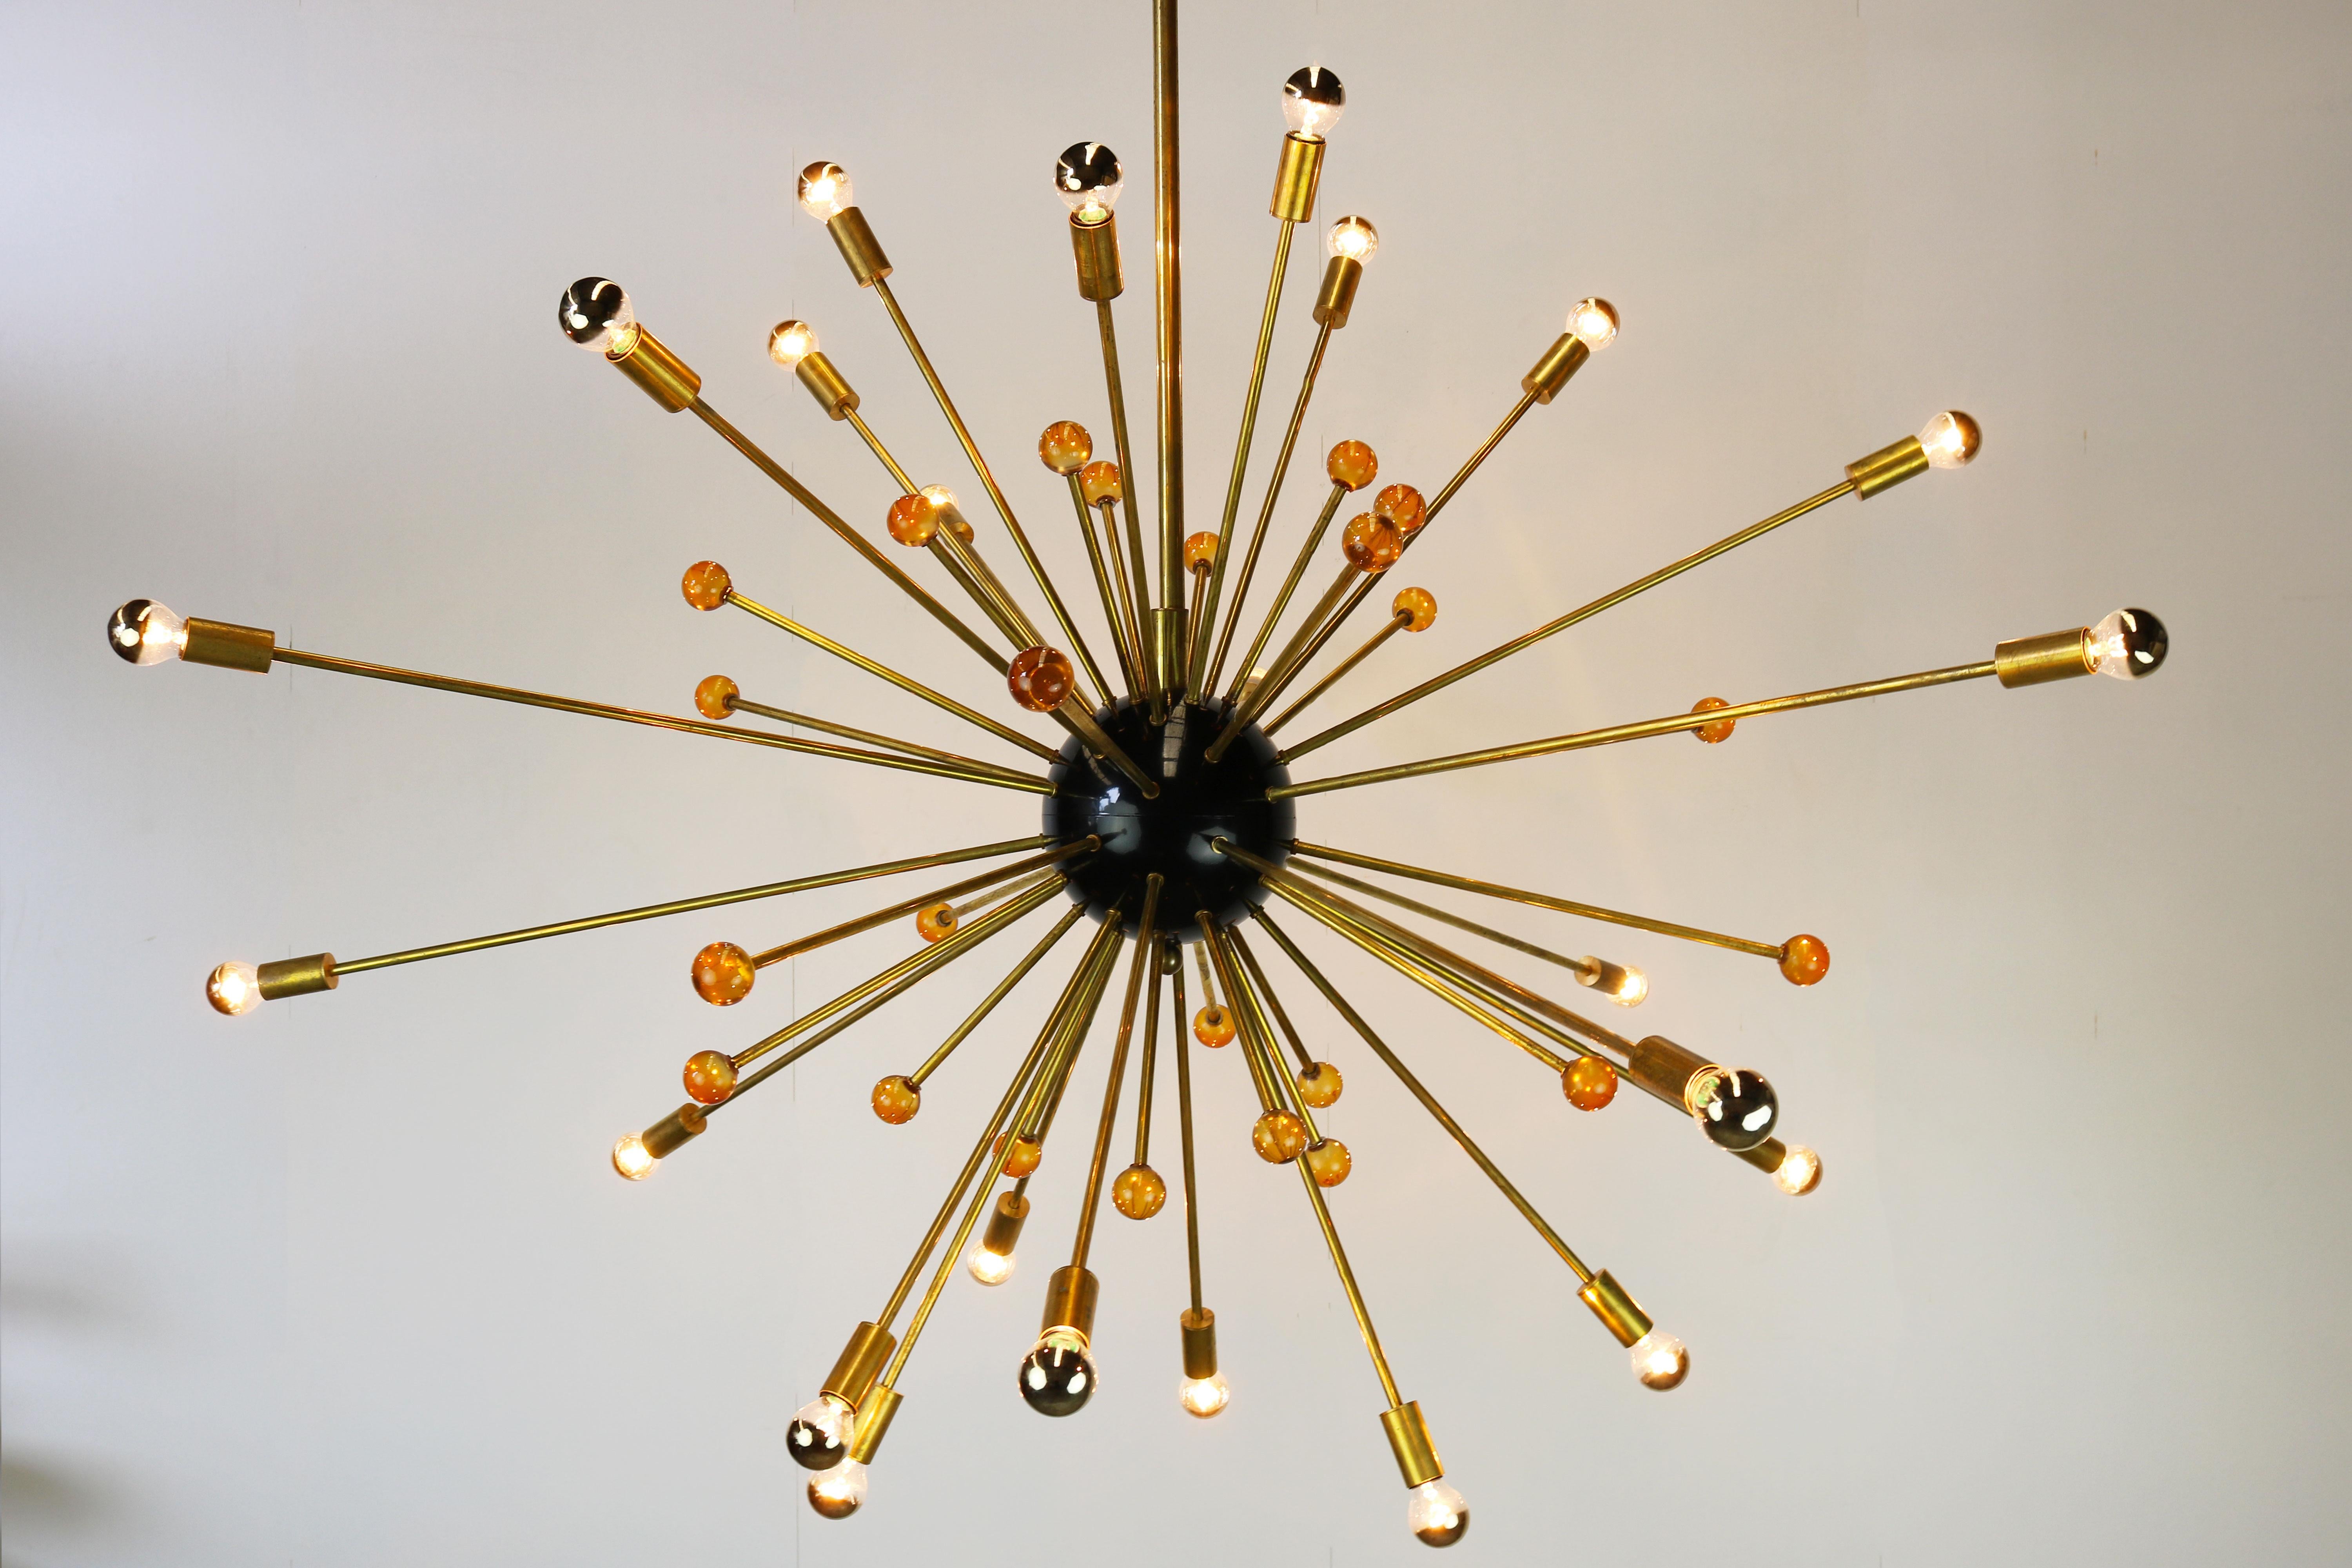 Pair of massive Sputnik chandelier Stilnovo with a diameter of 150 cm from the 1950s very large chandeliers. Each chandelier has 48 brass rods, 24 rods have a light socket and the other 24 rods have a orange glass sphere. Its Minimalistic shape make